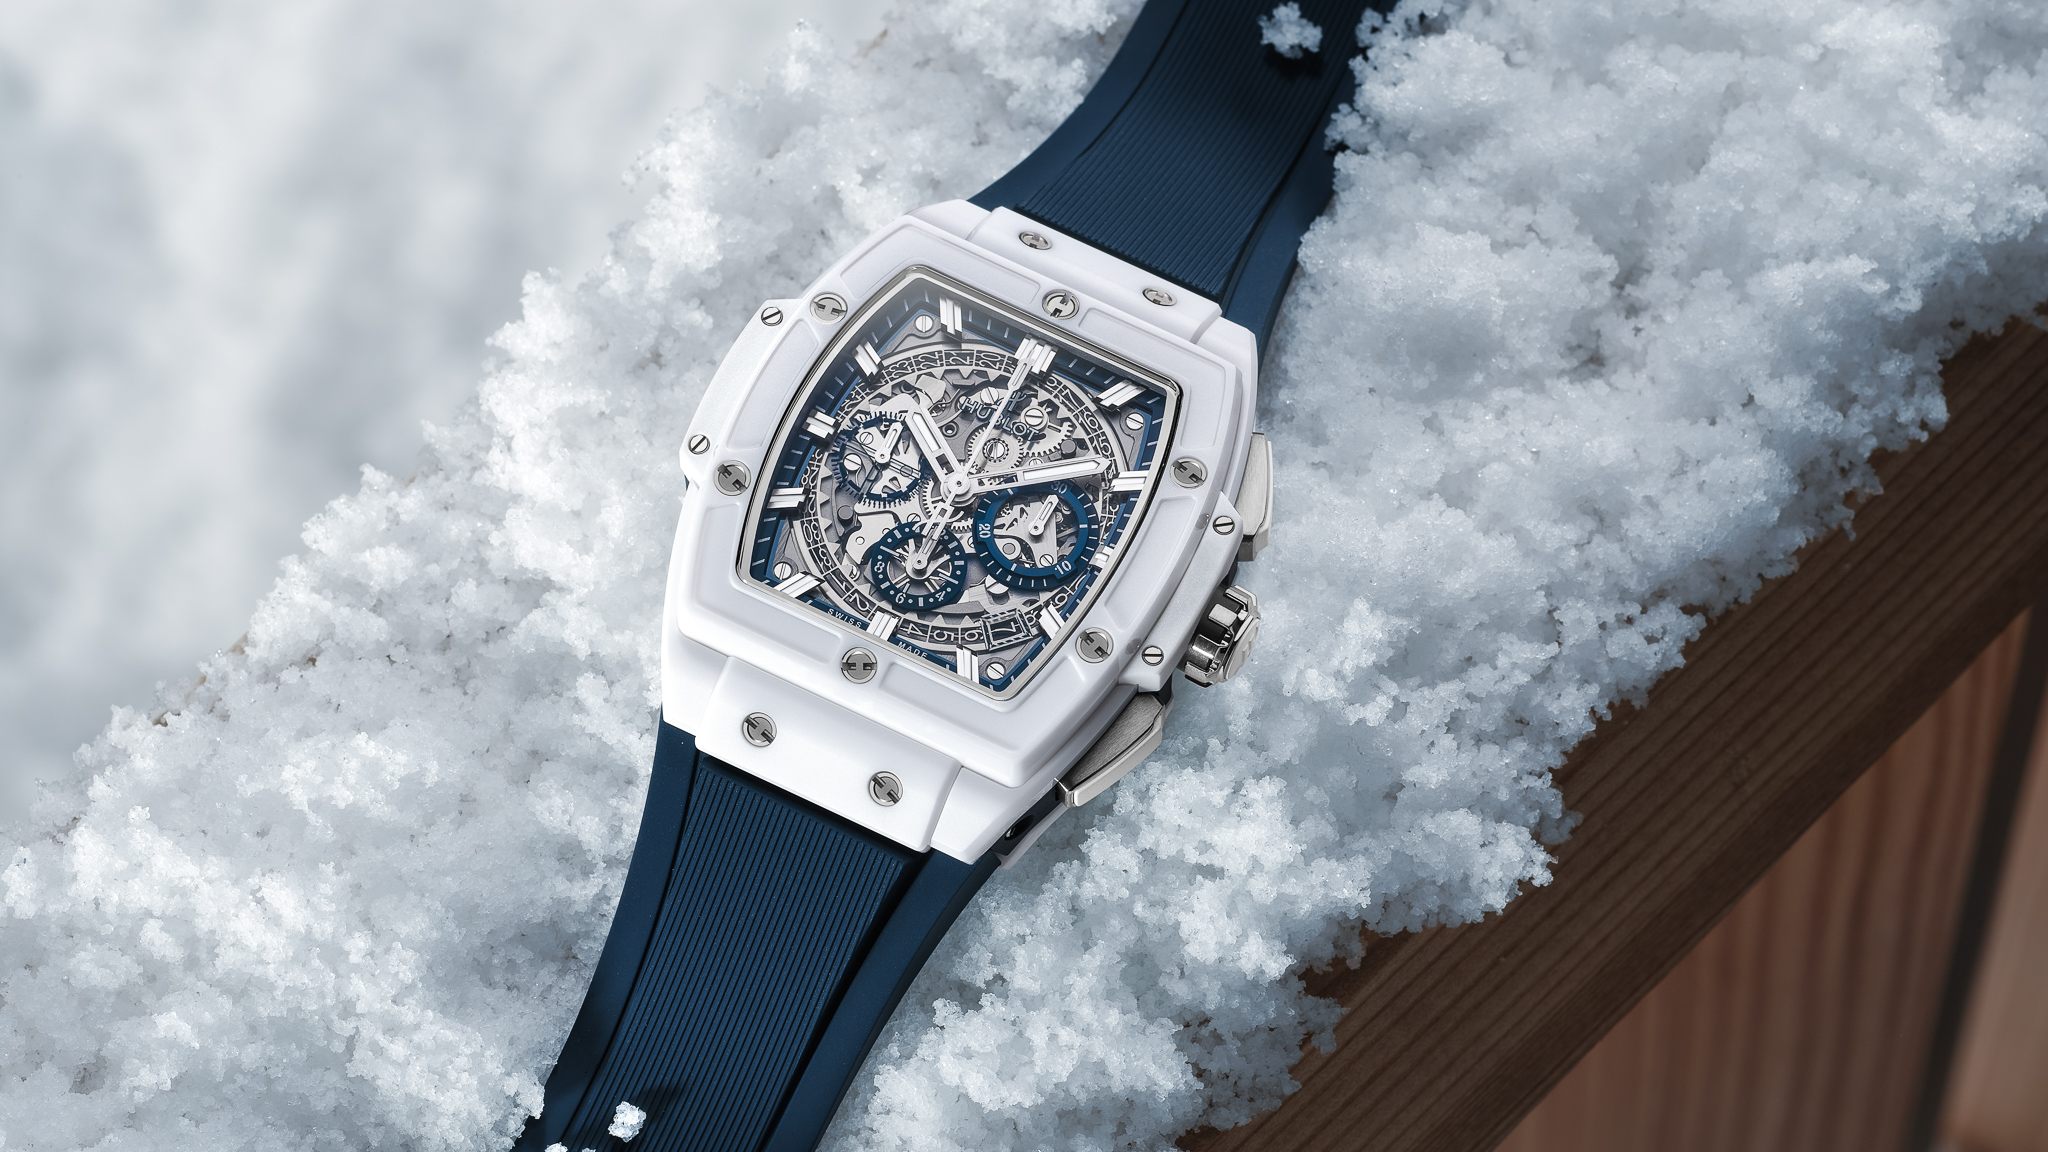 Hublot Opens New Aspen Boutique With Spirit of Big Bang Rockies Limited Edition Watch Releases 